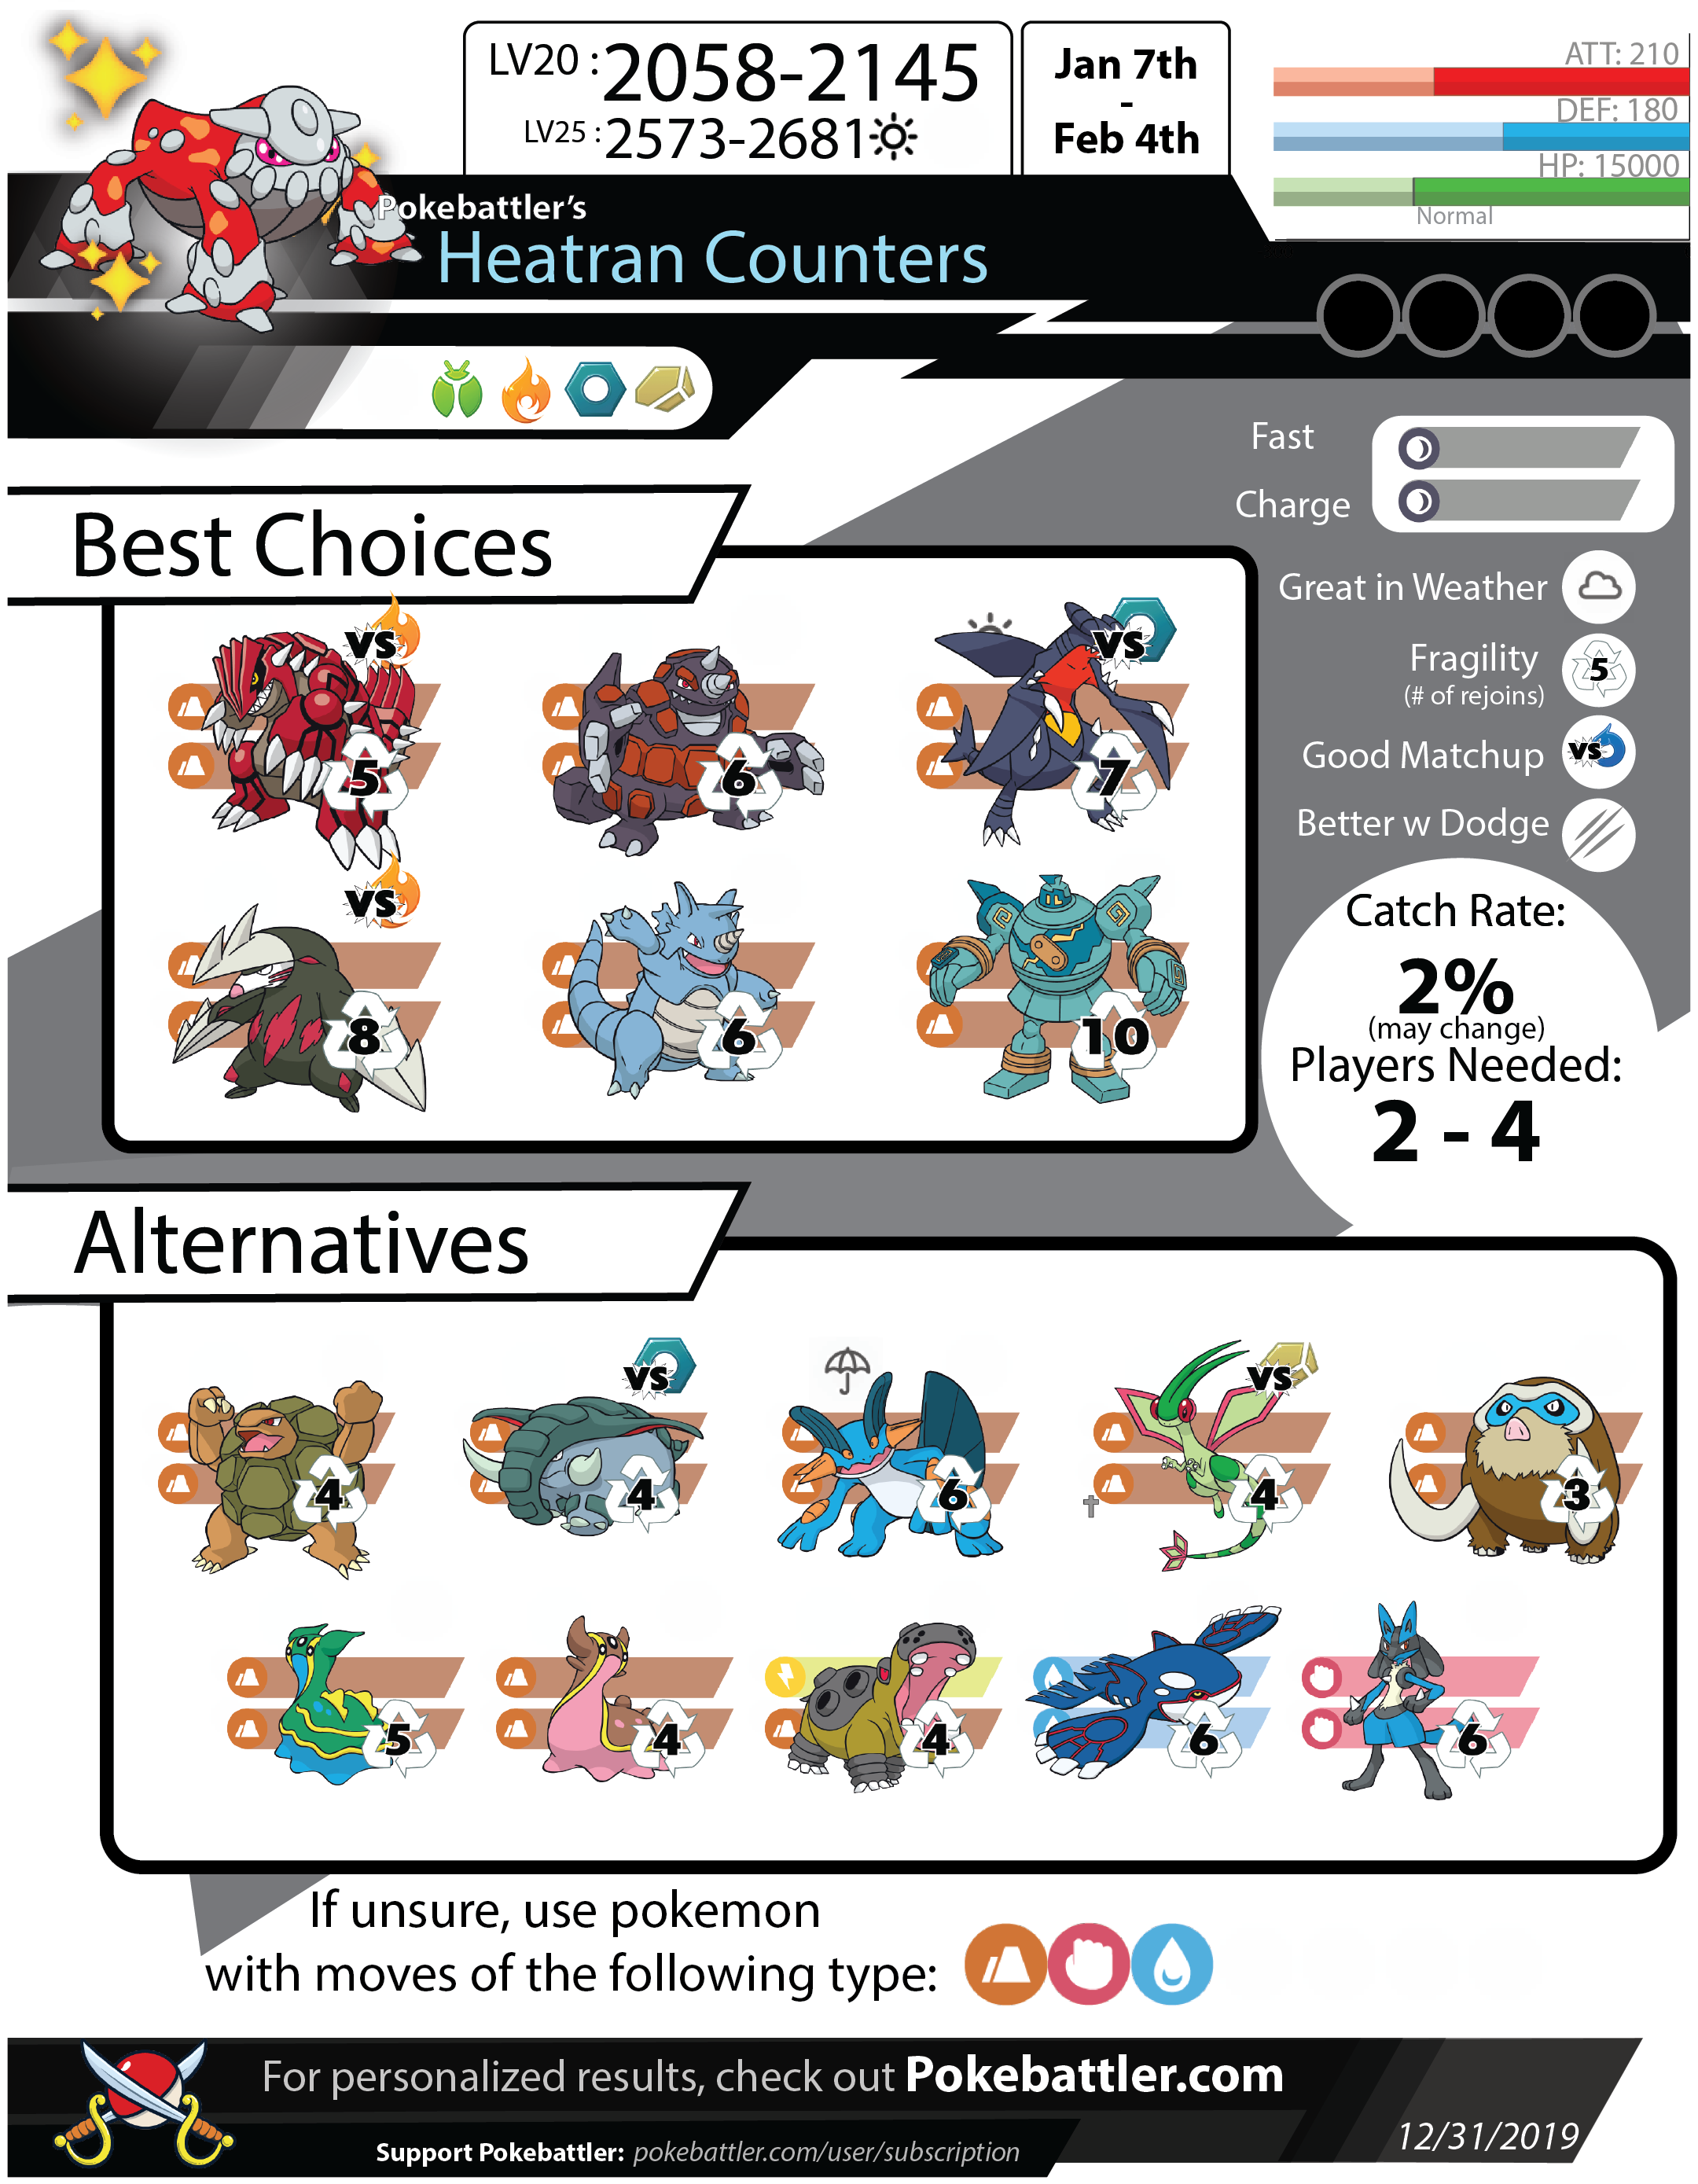 Groudon Raid Guide Infographic Featuring Weather